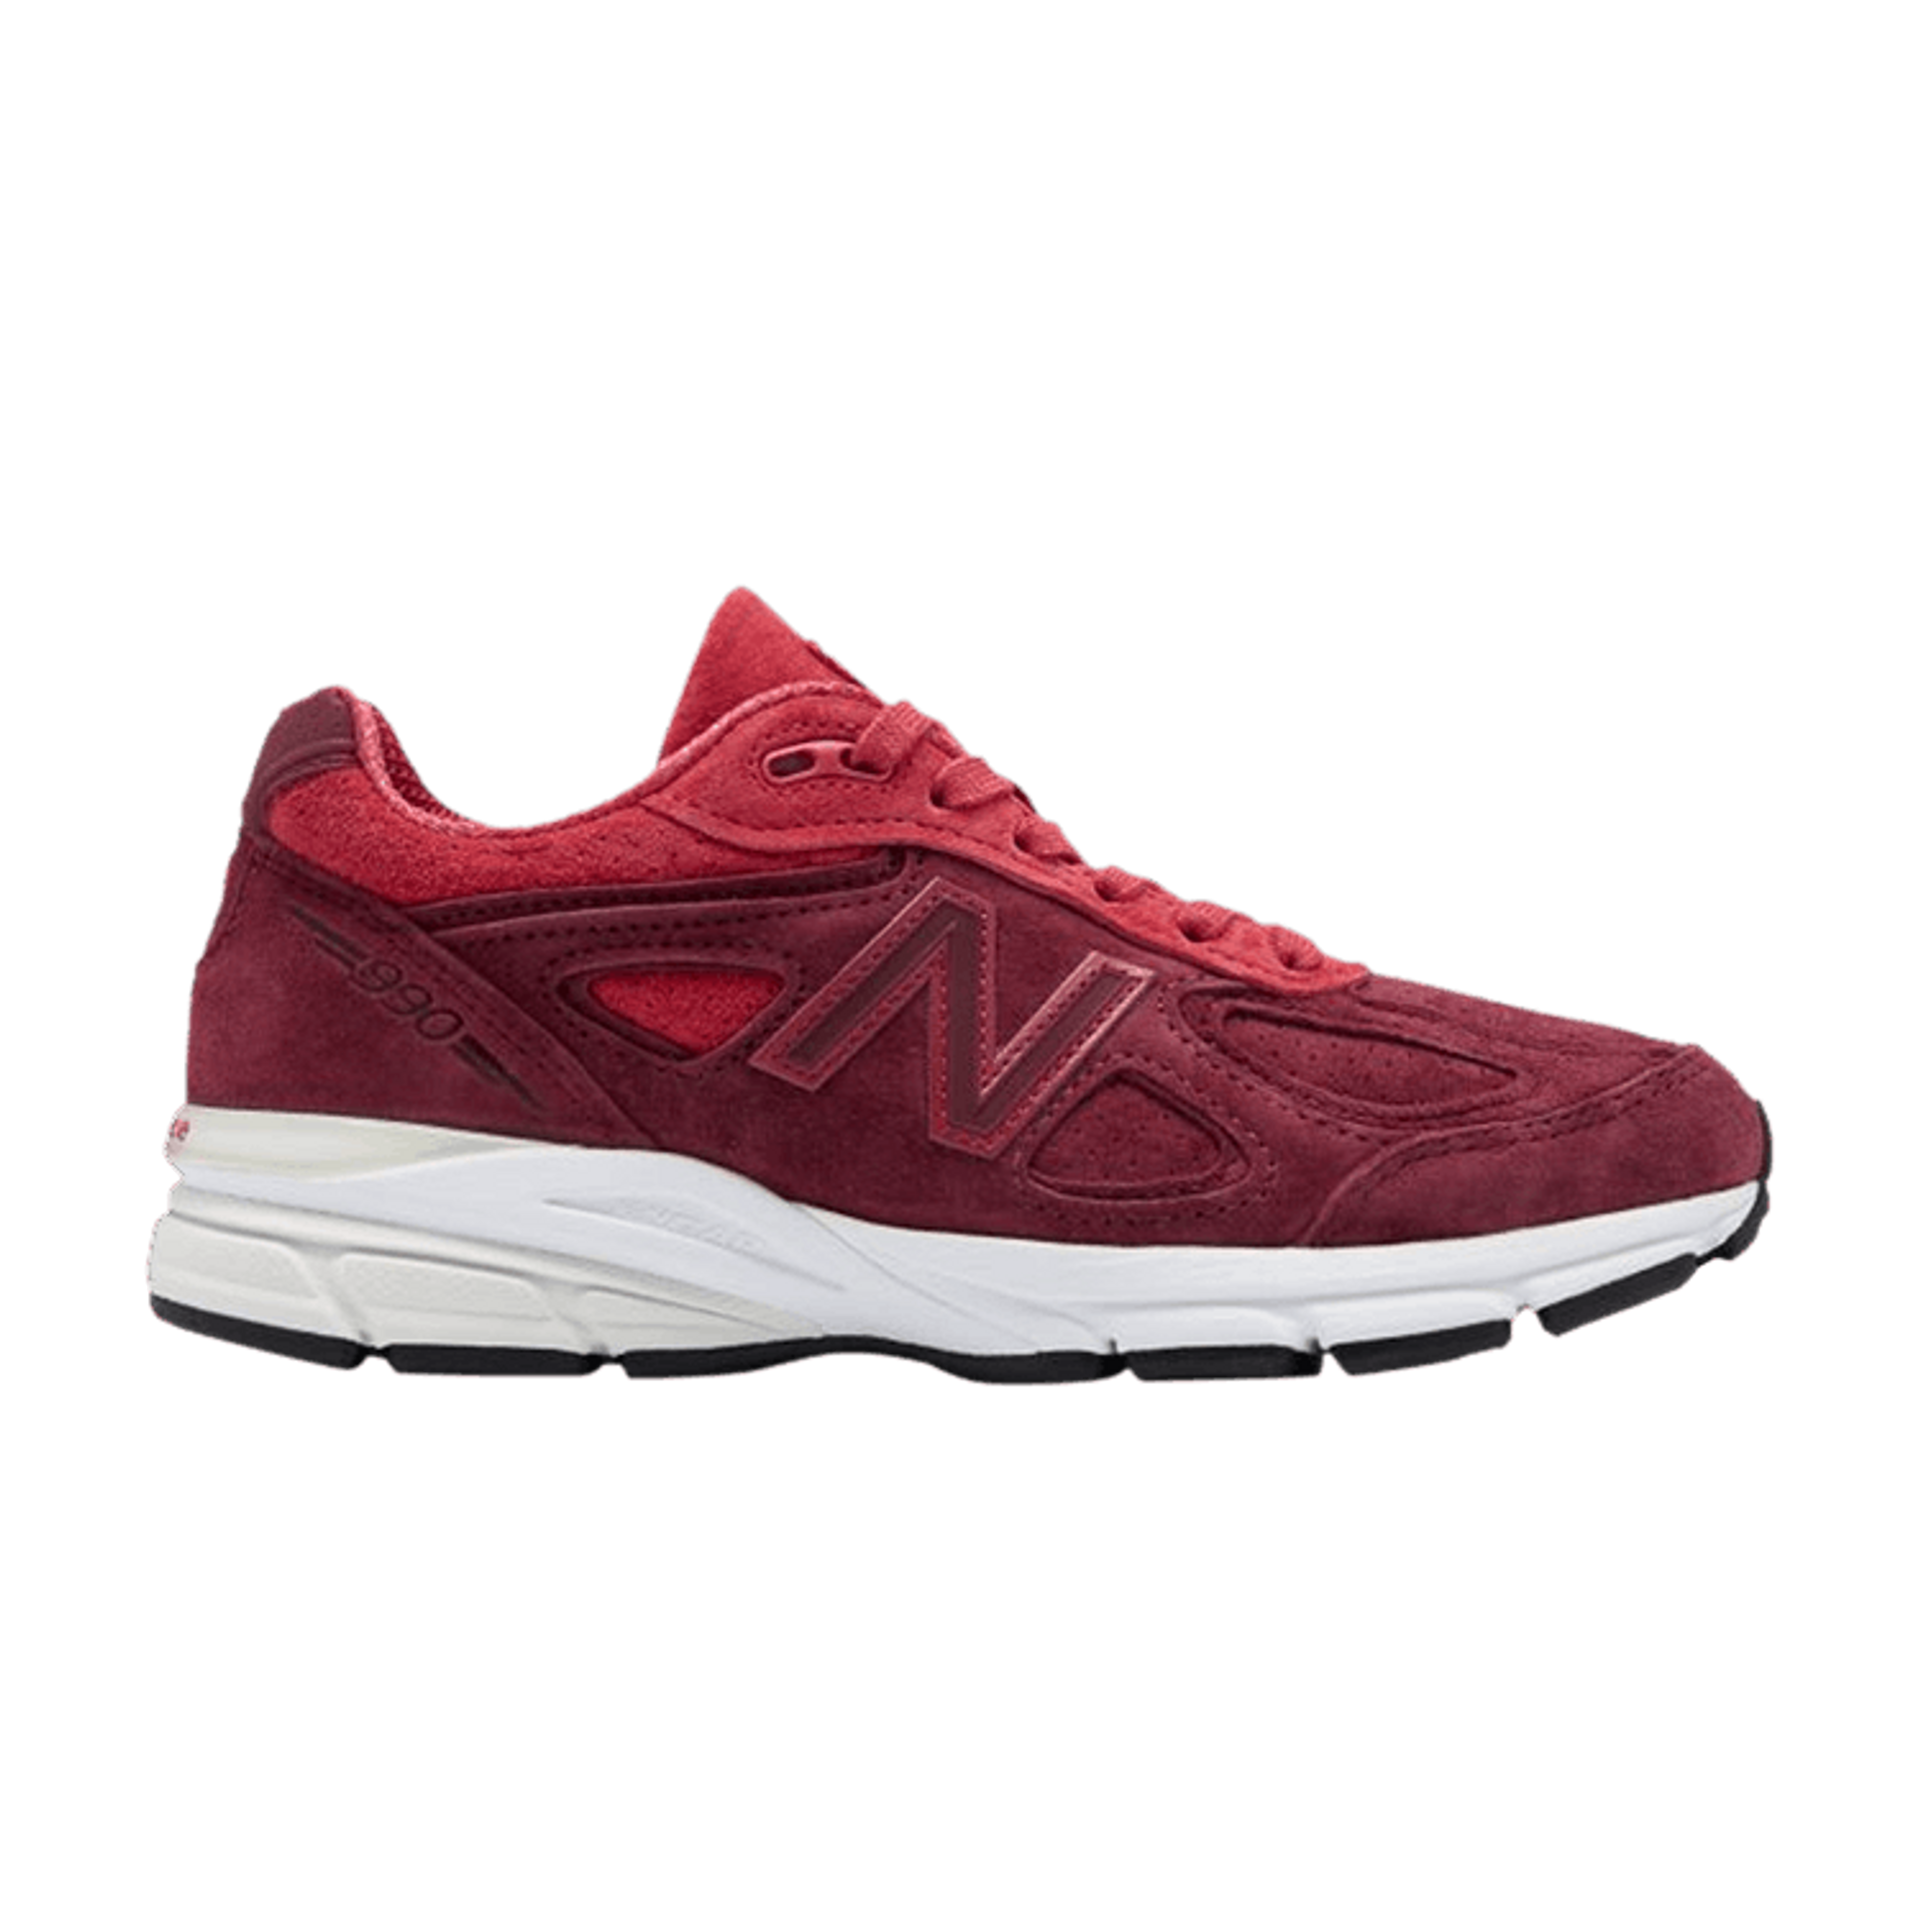 Wmns 990v4 Made in USA 'Mercury Red'